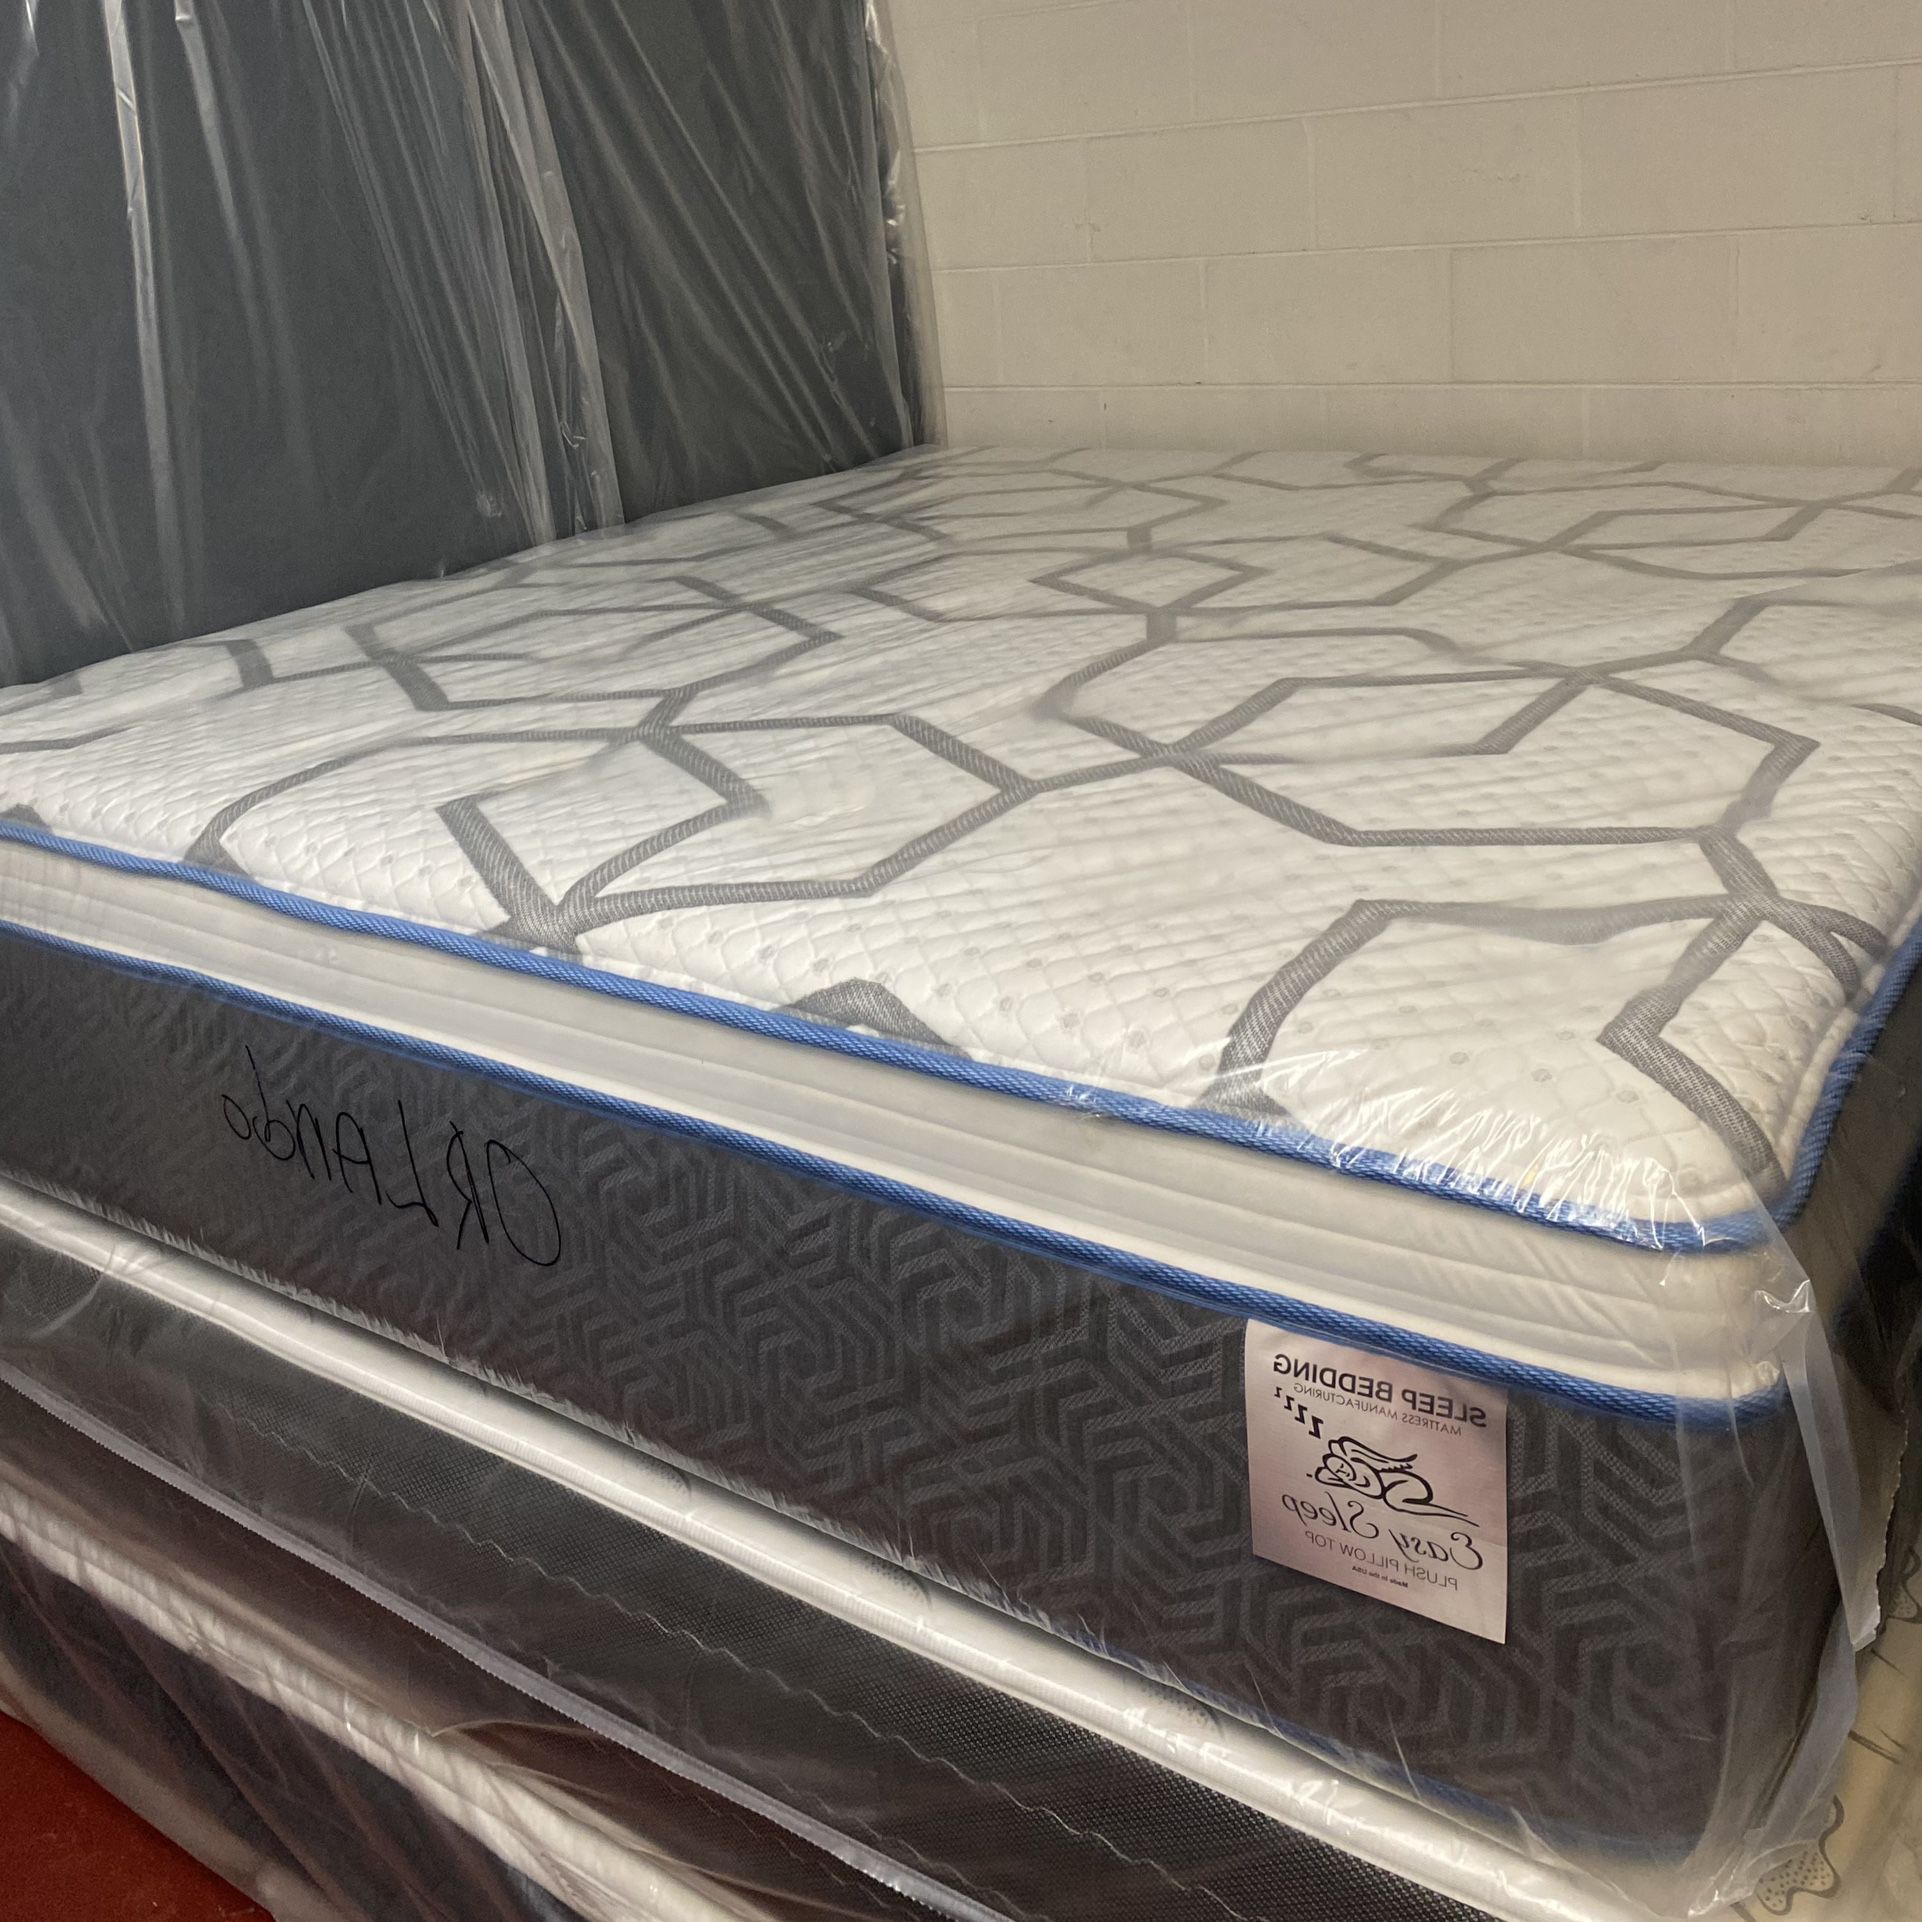 King Size Mattress 14” Inches Pillow Top Of High Quality Also Available in Twin-Full-Queen and Cali-King Same Day Delivery